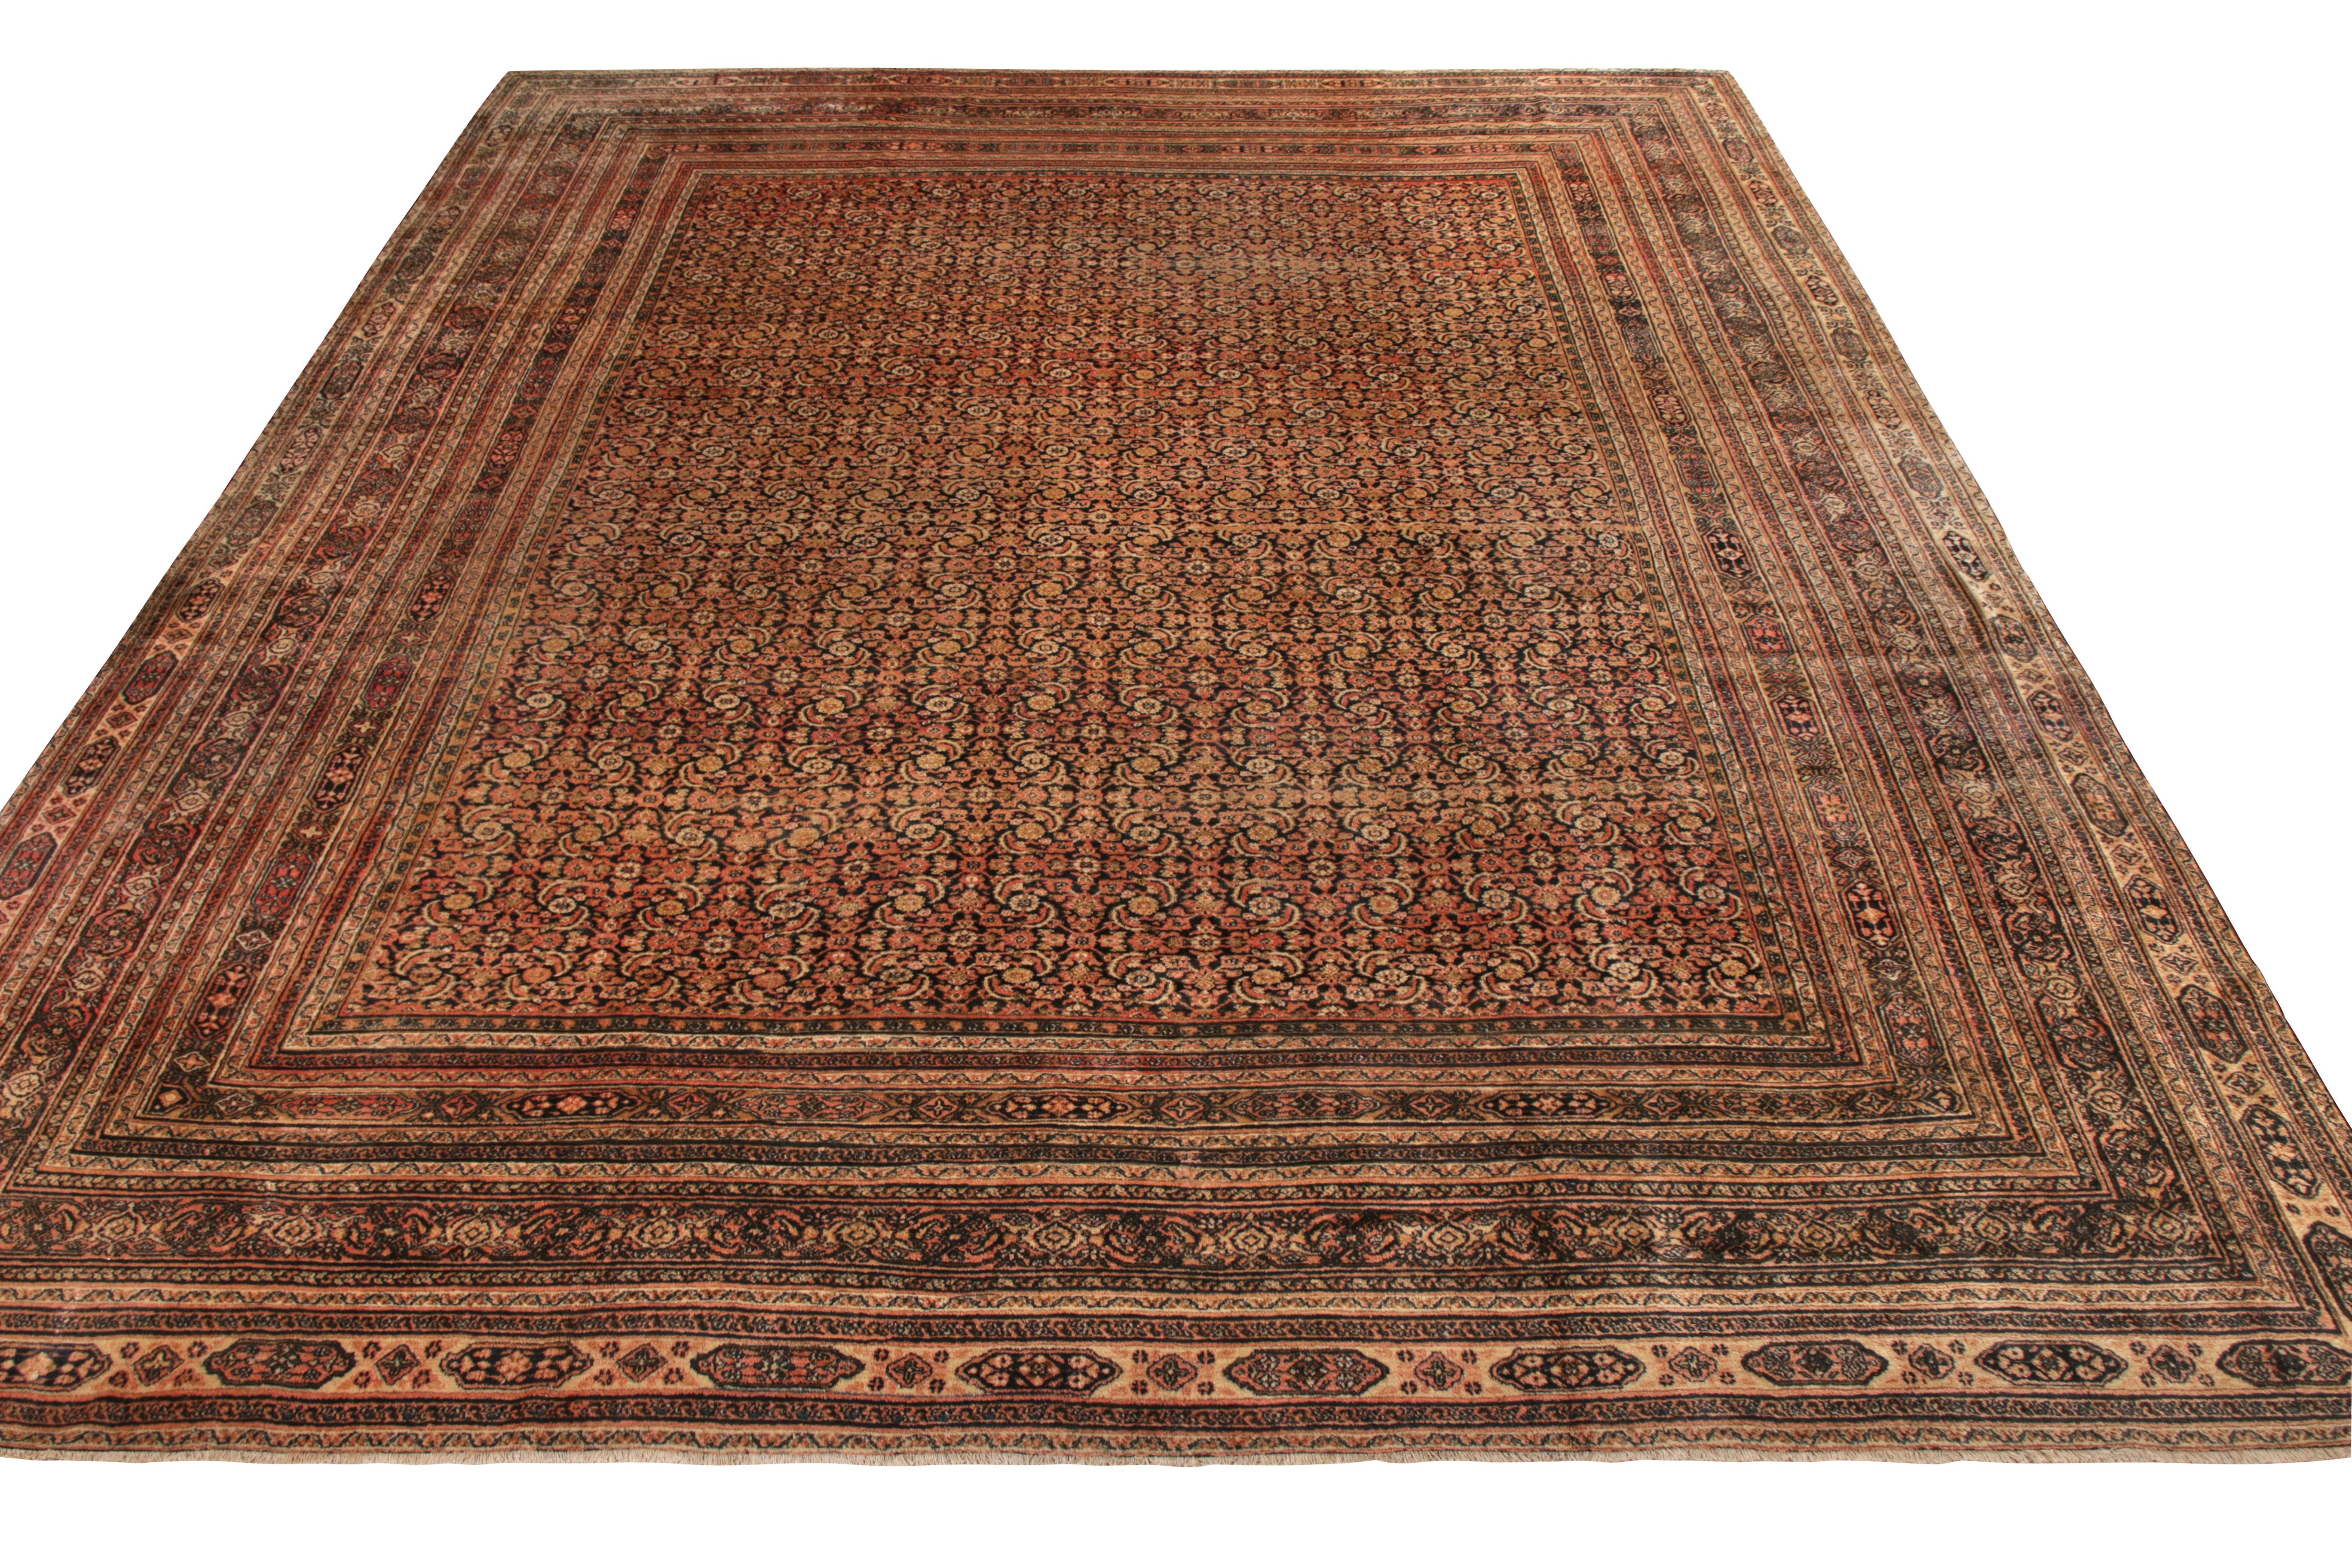 A spacious 13 x 15 antique Doroksh rug from the most distinctive Persian Rugs in our collection. Hand knotted in wool circa 1880–1890, this rare piece boasts the mesmerising union of design and colour, painstakingly crafted as an overall Herati